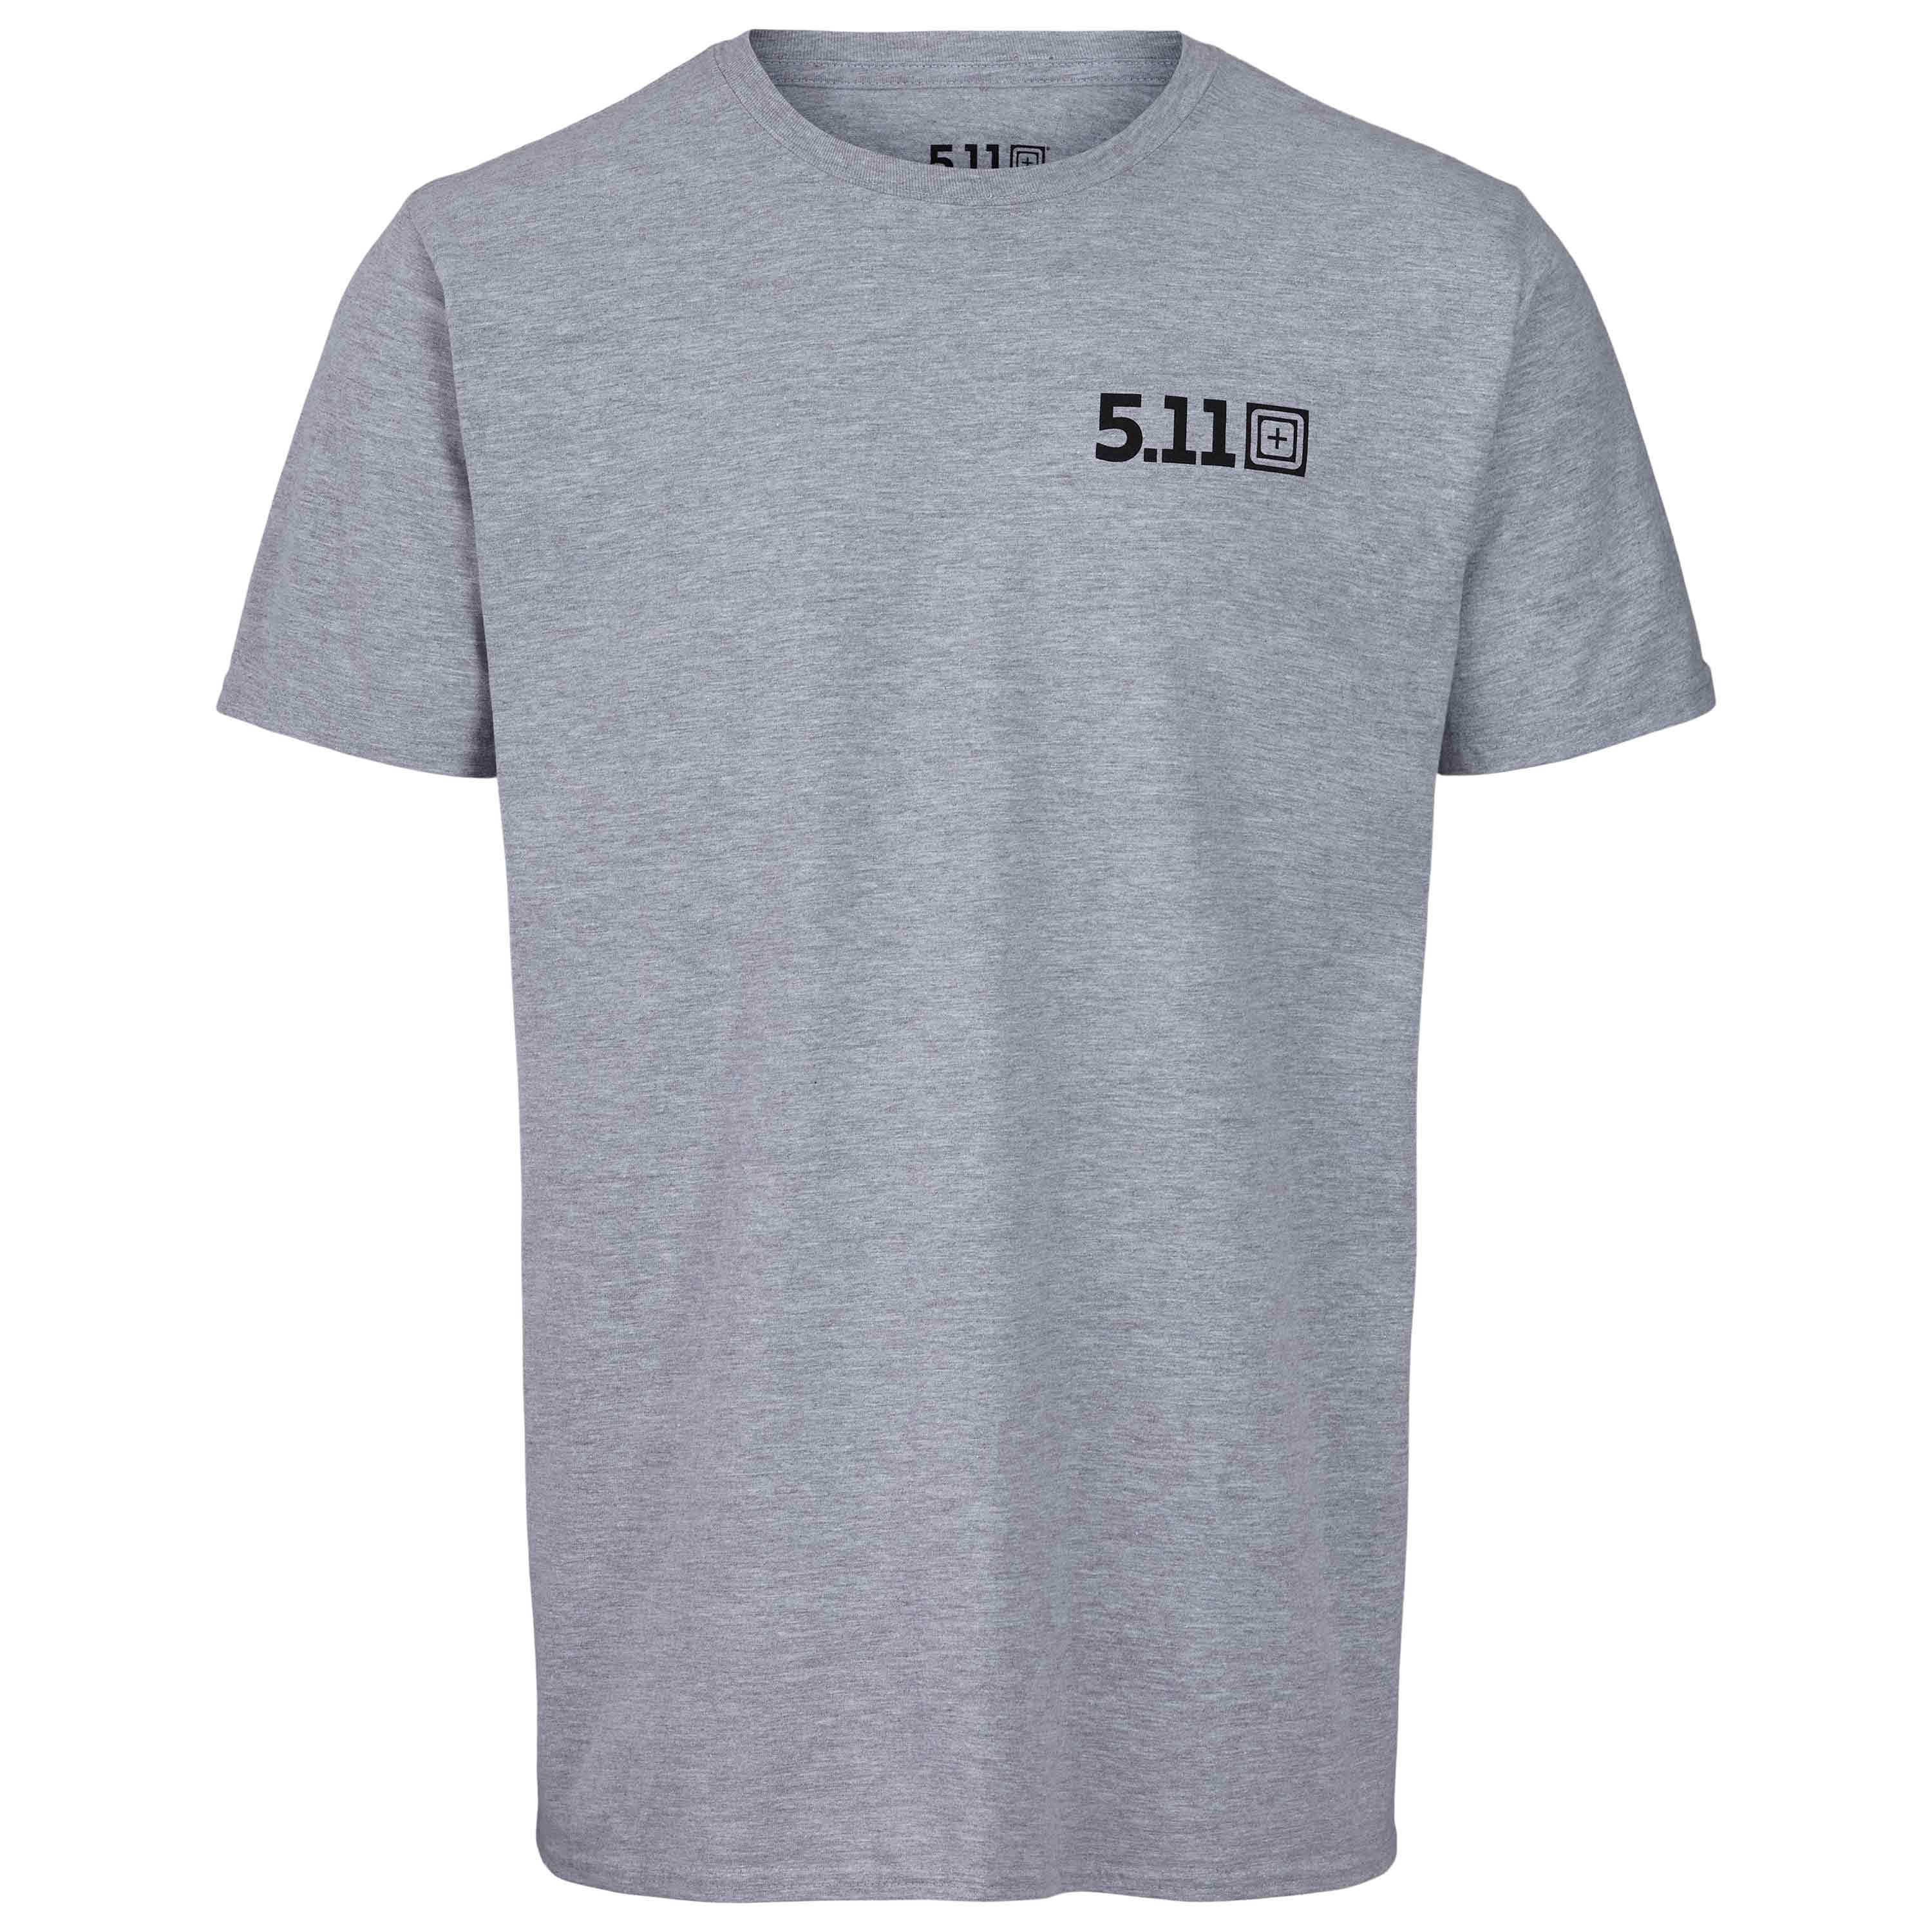 Purchase the 5.11 T-Shirt Train with Purpose gray heather by ASM